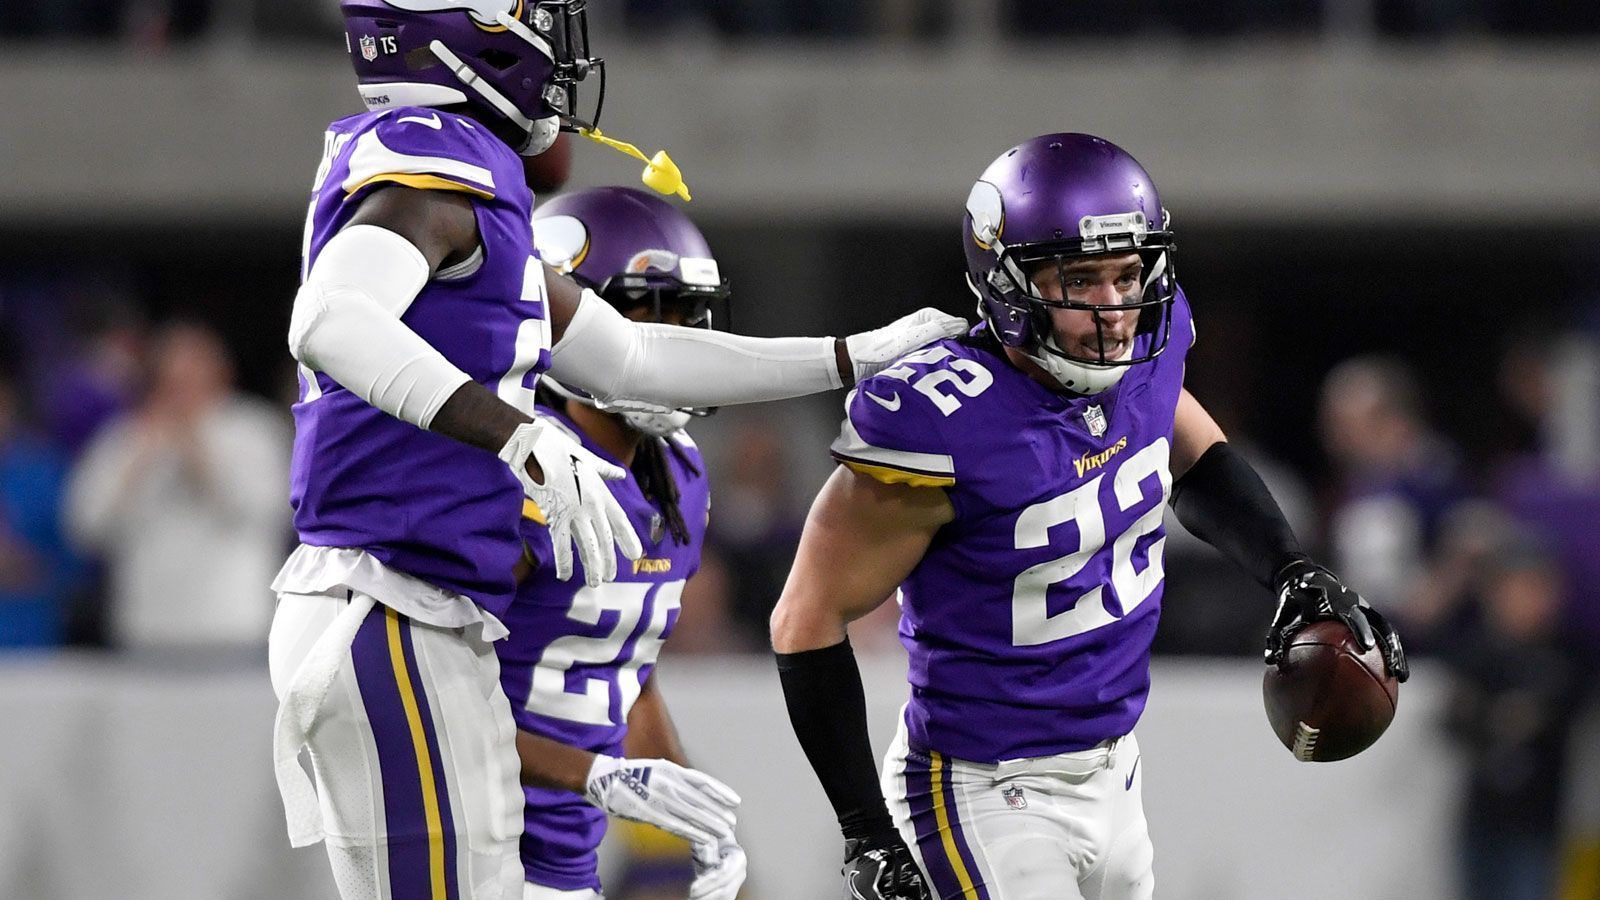 
                <strong>4 - Minnesota Vikings</strong><br>
                Adam Thielen (Wide Receiver), Stefon Diggs (Wide Receiver), Kirk Cousins (Quarterback), Harrison Smith (Safety)
              